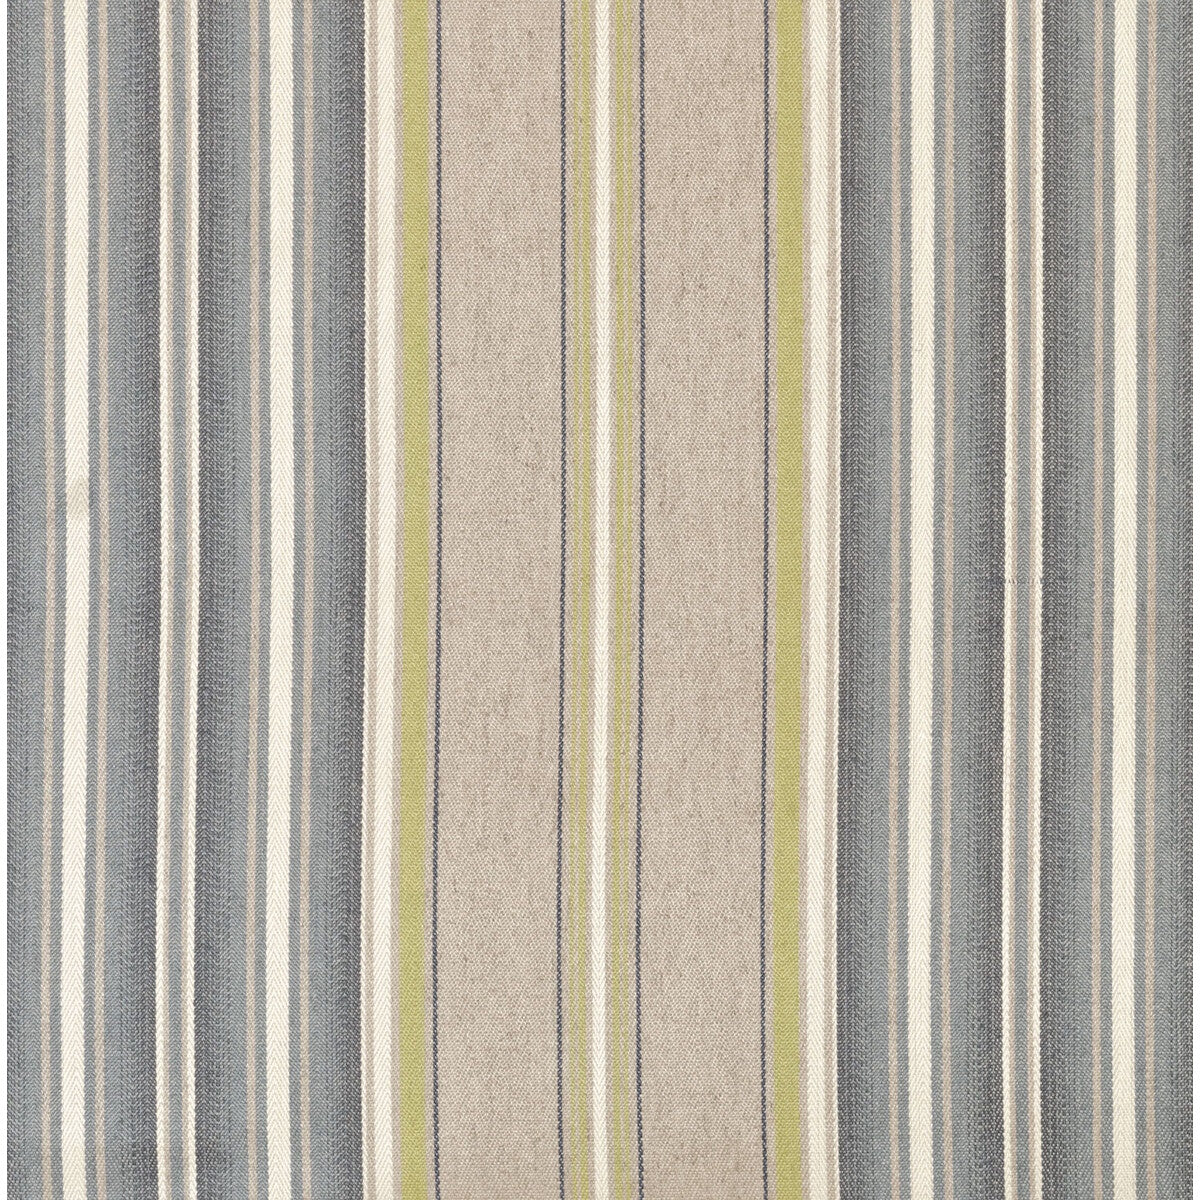 Windsor Stripe fabric in beige/blue color - pattern BFC-3659.165.0 - by Lee Jofa in the Blithfield collection